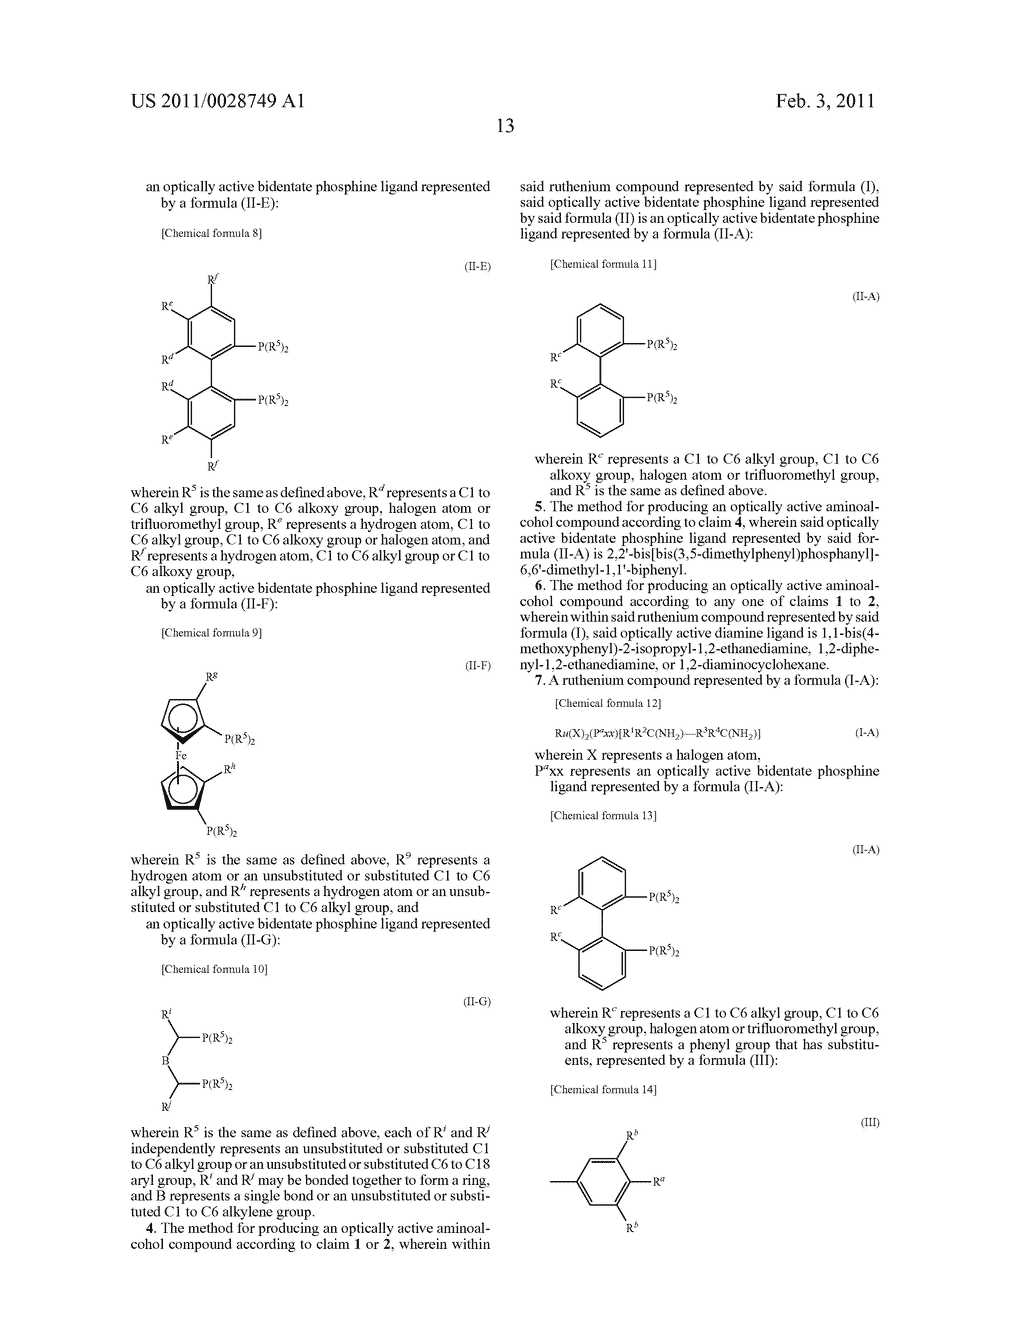 RUTHENIUM COMPOUND AND METHOD FOR PRODUCING OPTICALLY ACTIVE AMINOALCOHOL COMPOUND - diagram, schematic, and image 14